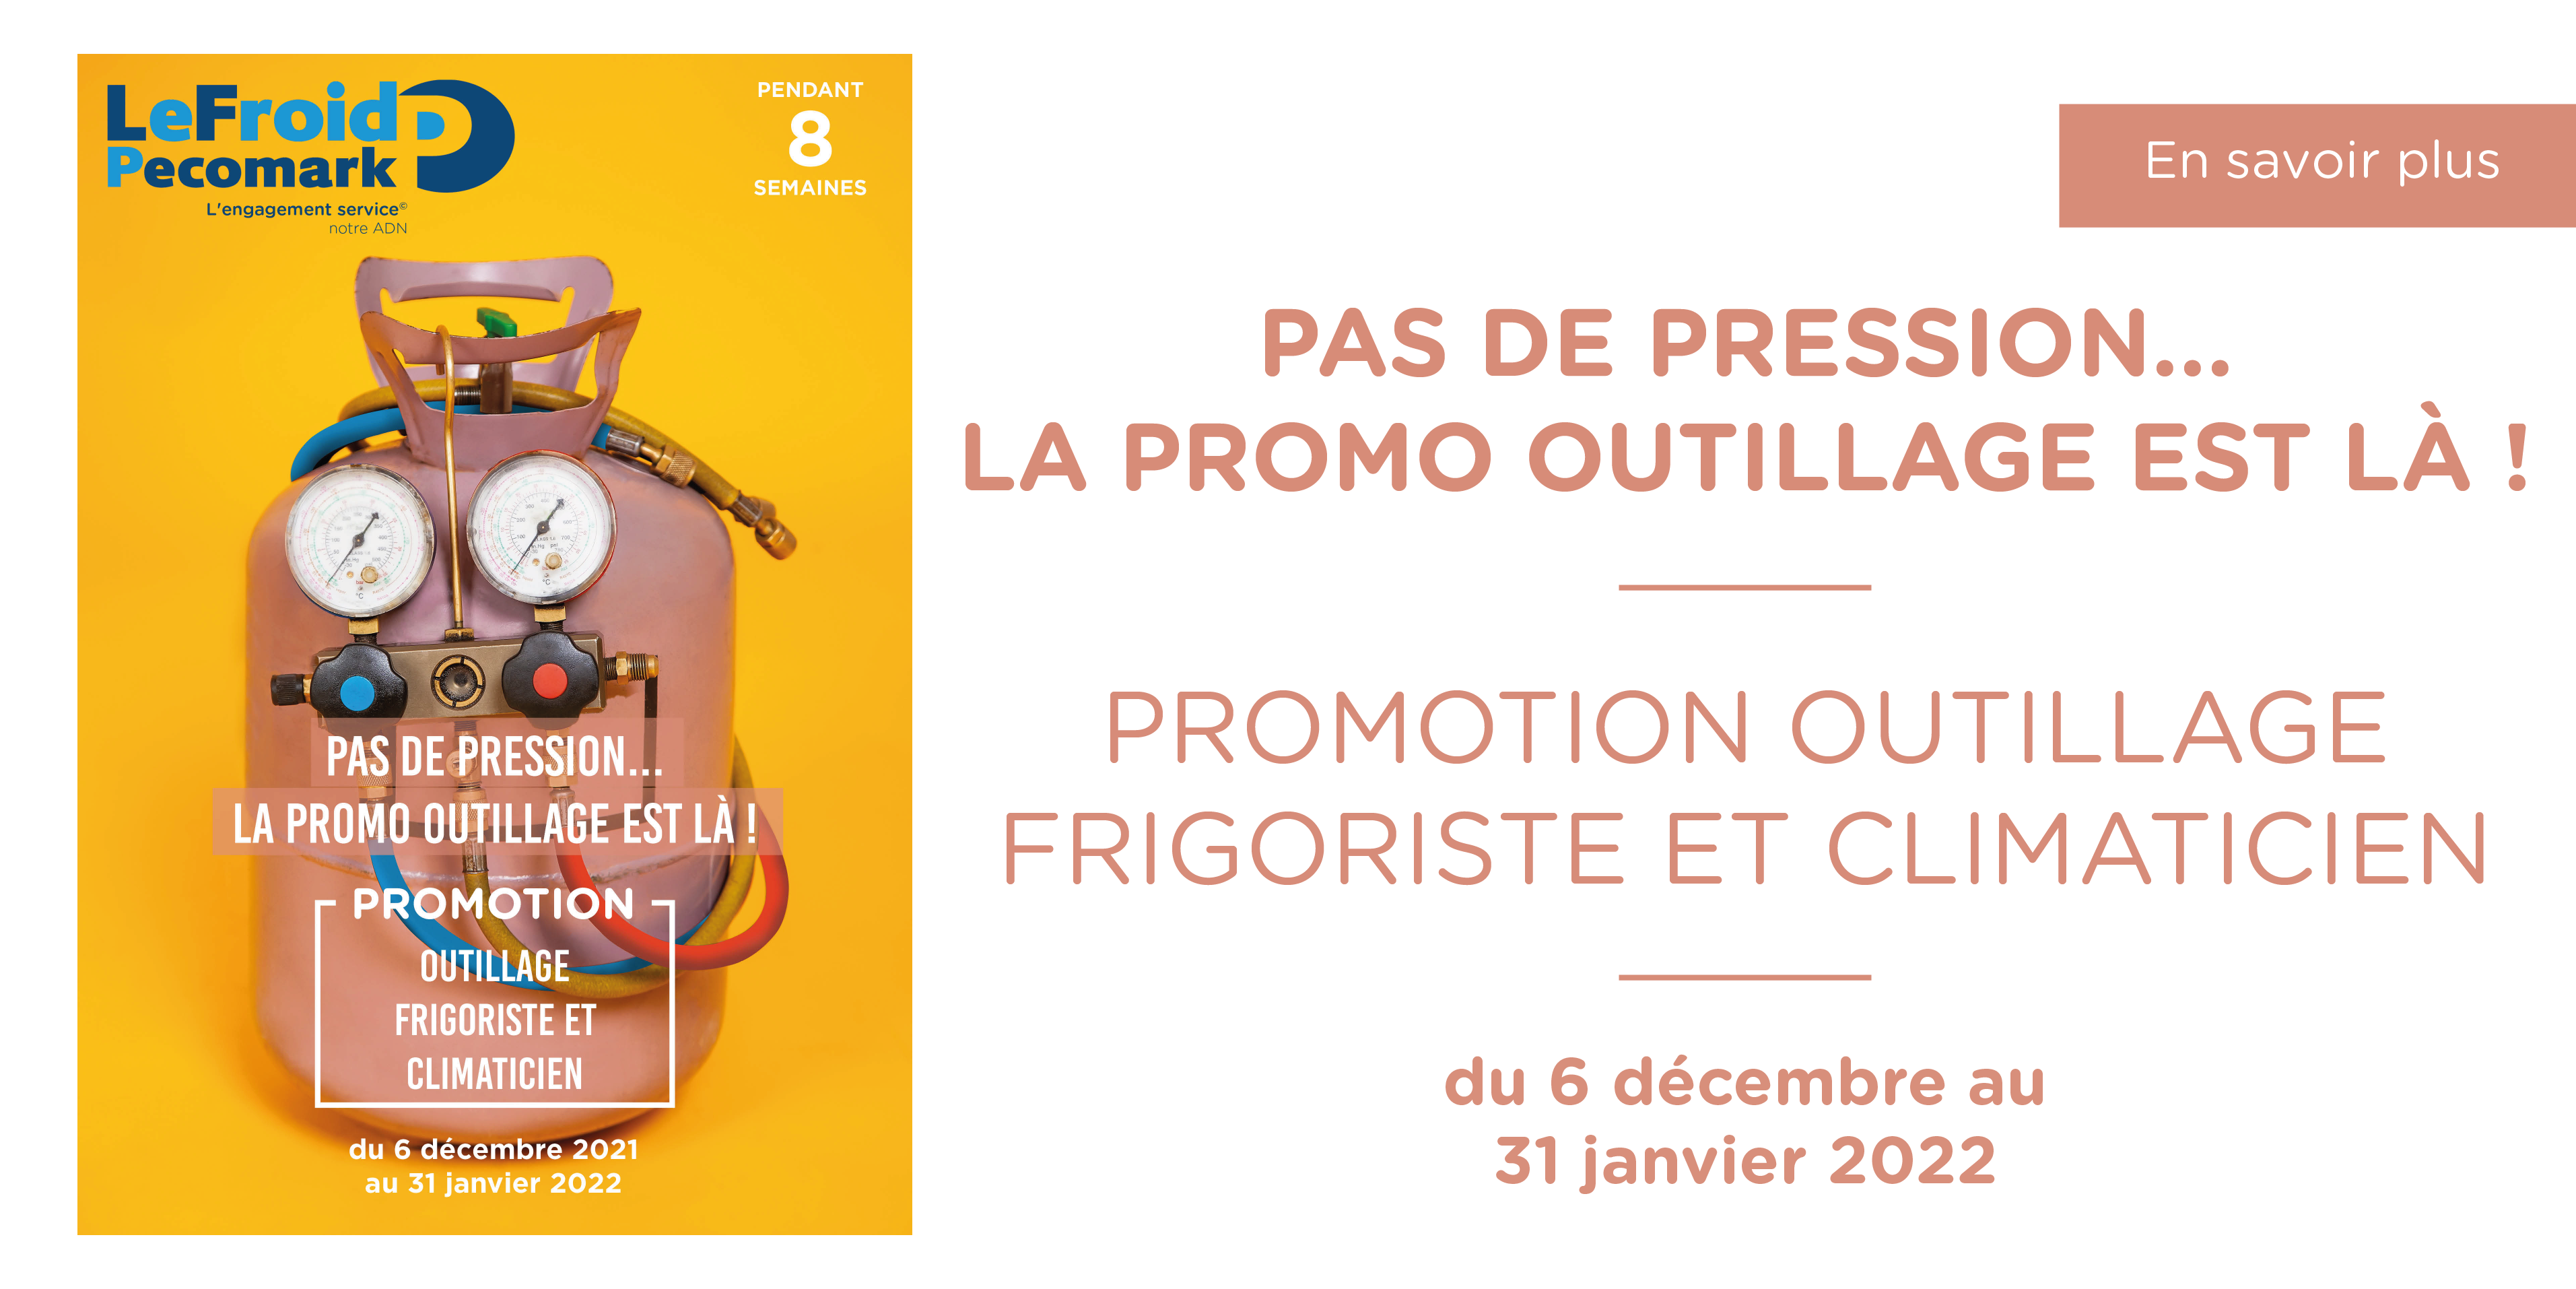 Promotion Outillage Froid2